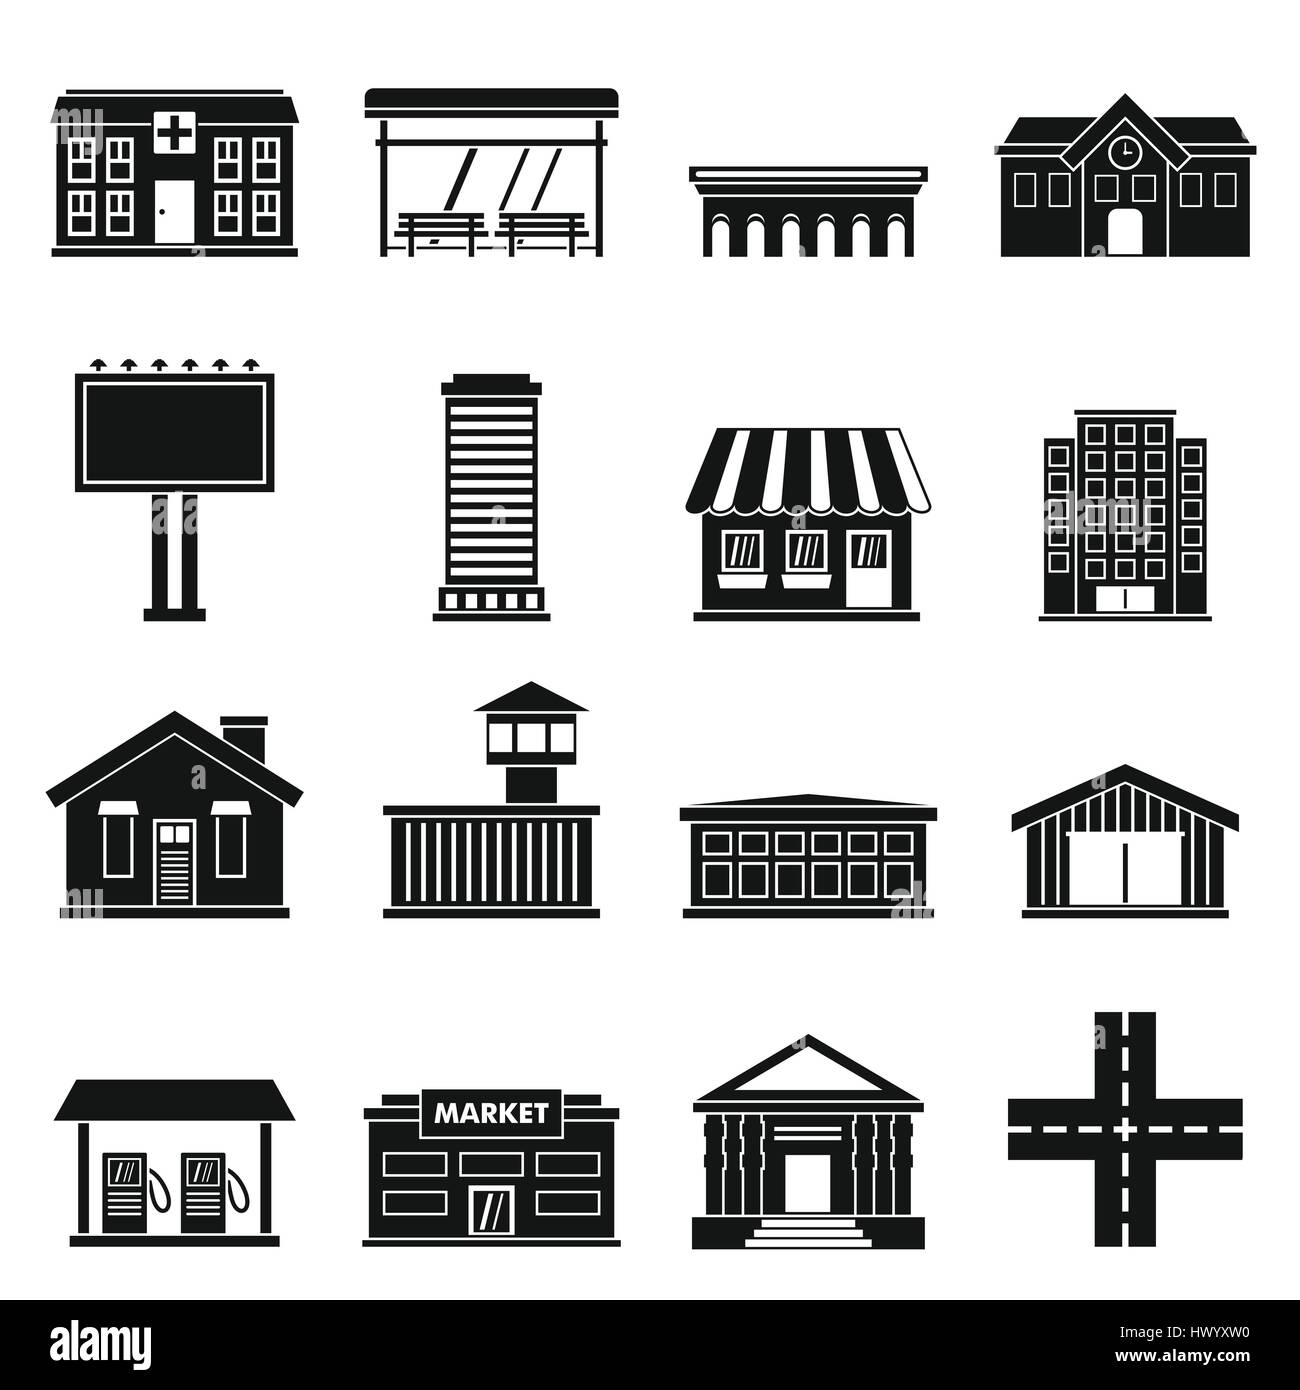 City infrastructure items icons set, simple style Stock Vector